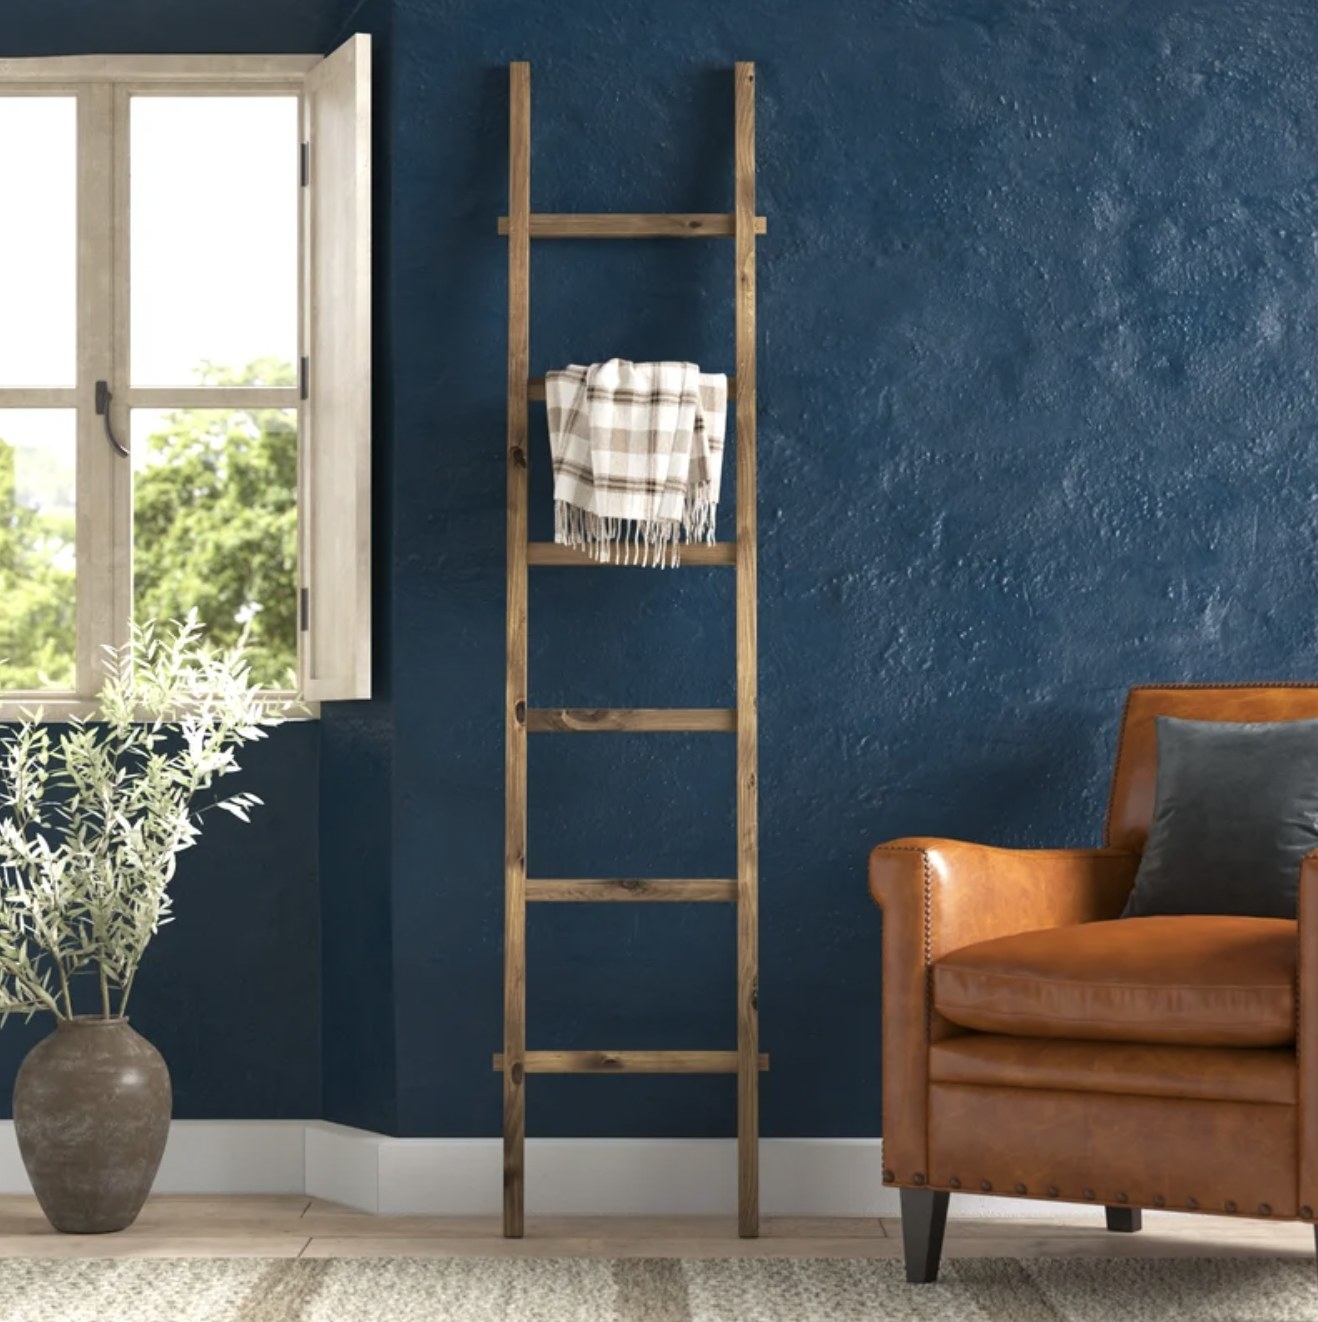 wooden ladder with blanket hanging on it